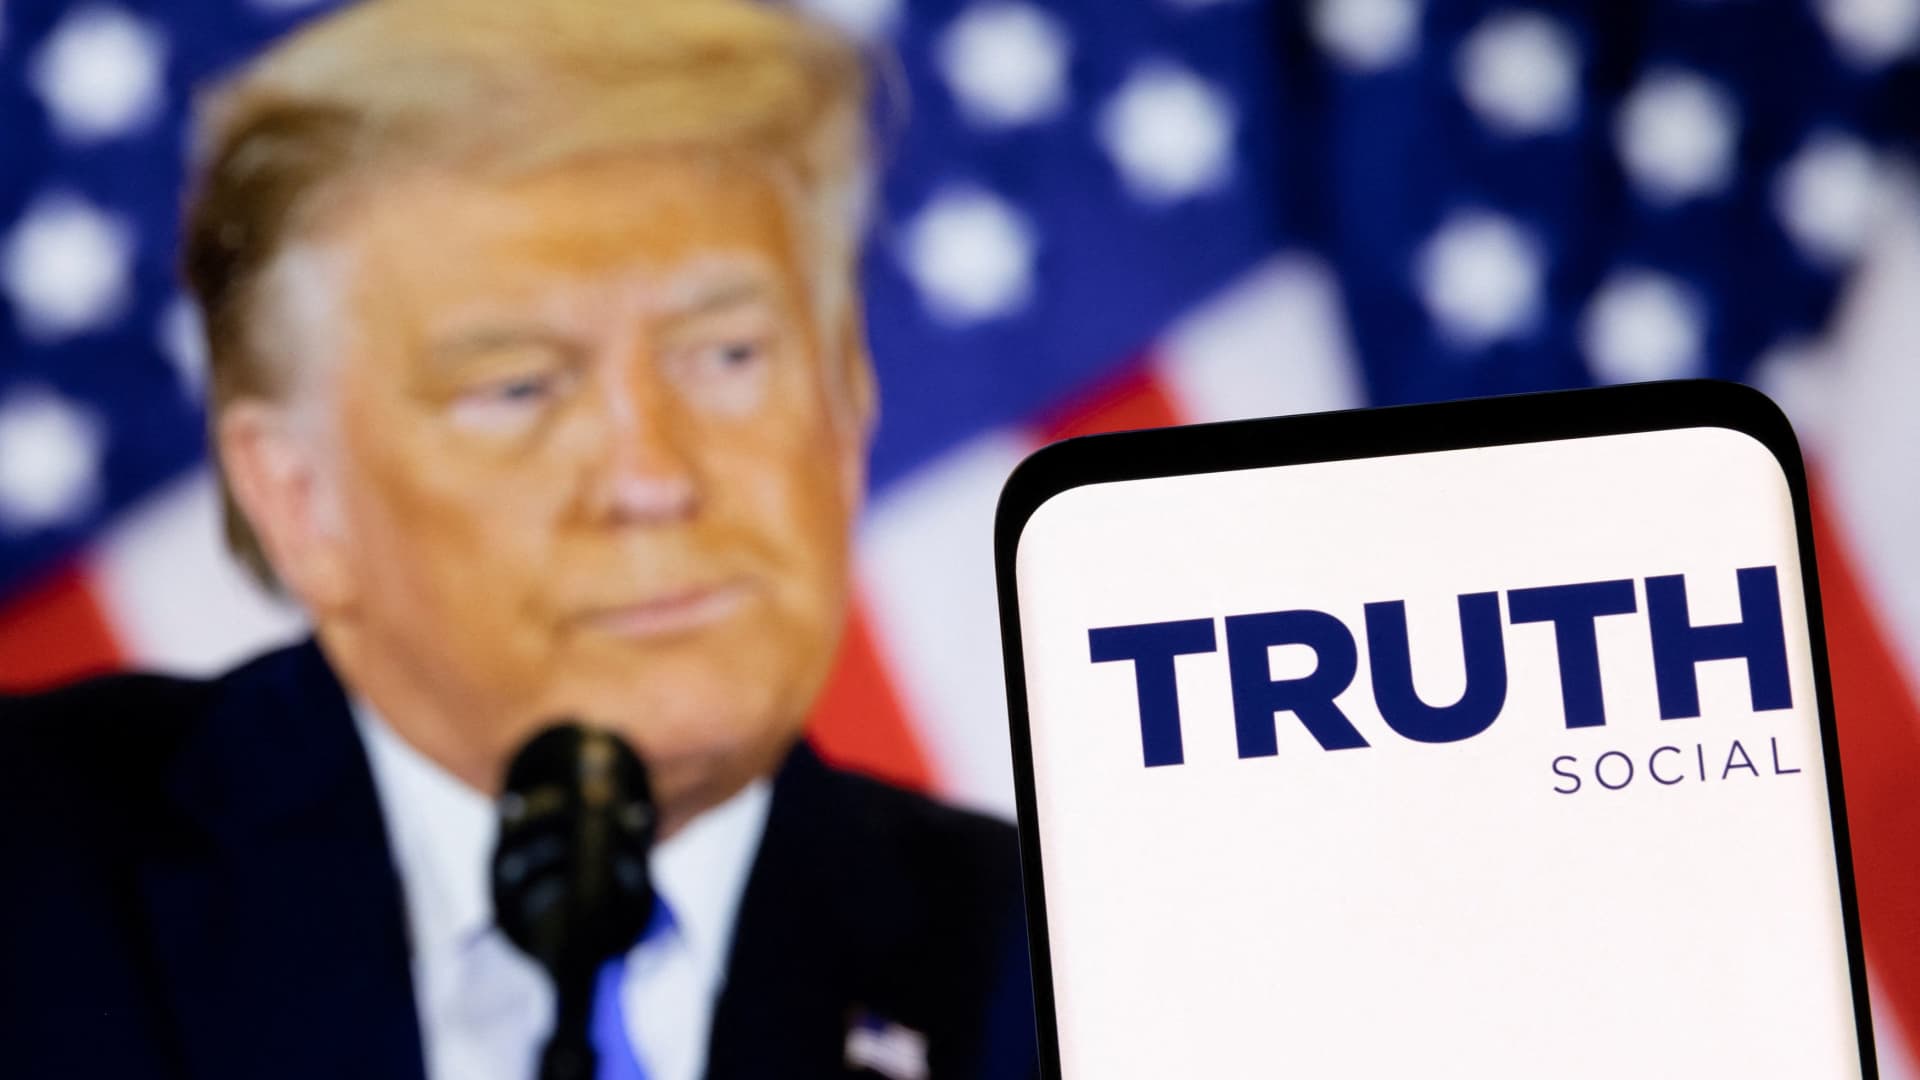 The Truth social network logo is seen on a smartphone in front of a display of former U.S. President Donald Trump in this picture illustration taken February 21, 2022.